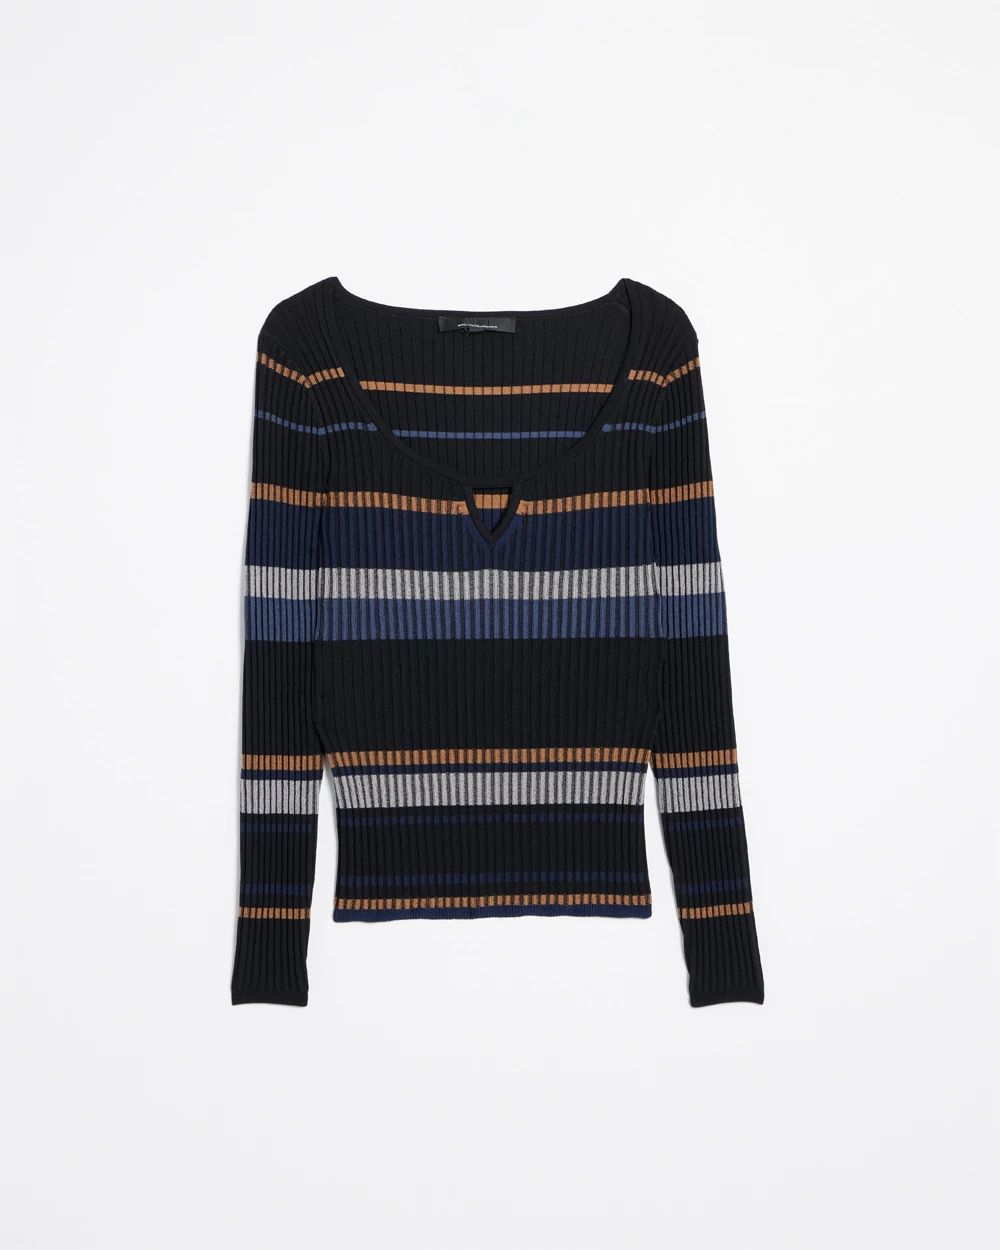 Long Sleeve Stripe Keyhole Pullover Sweater click to view larger image.